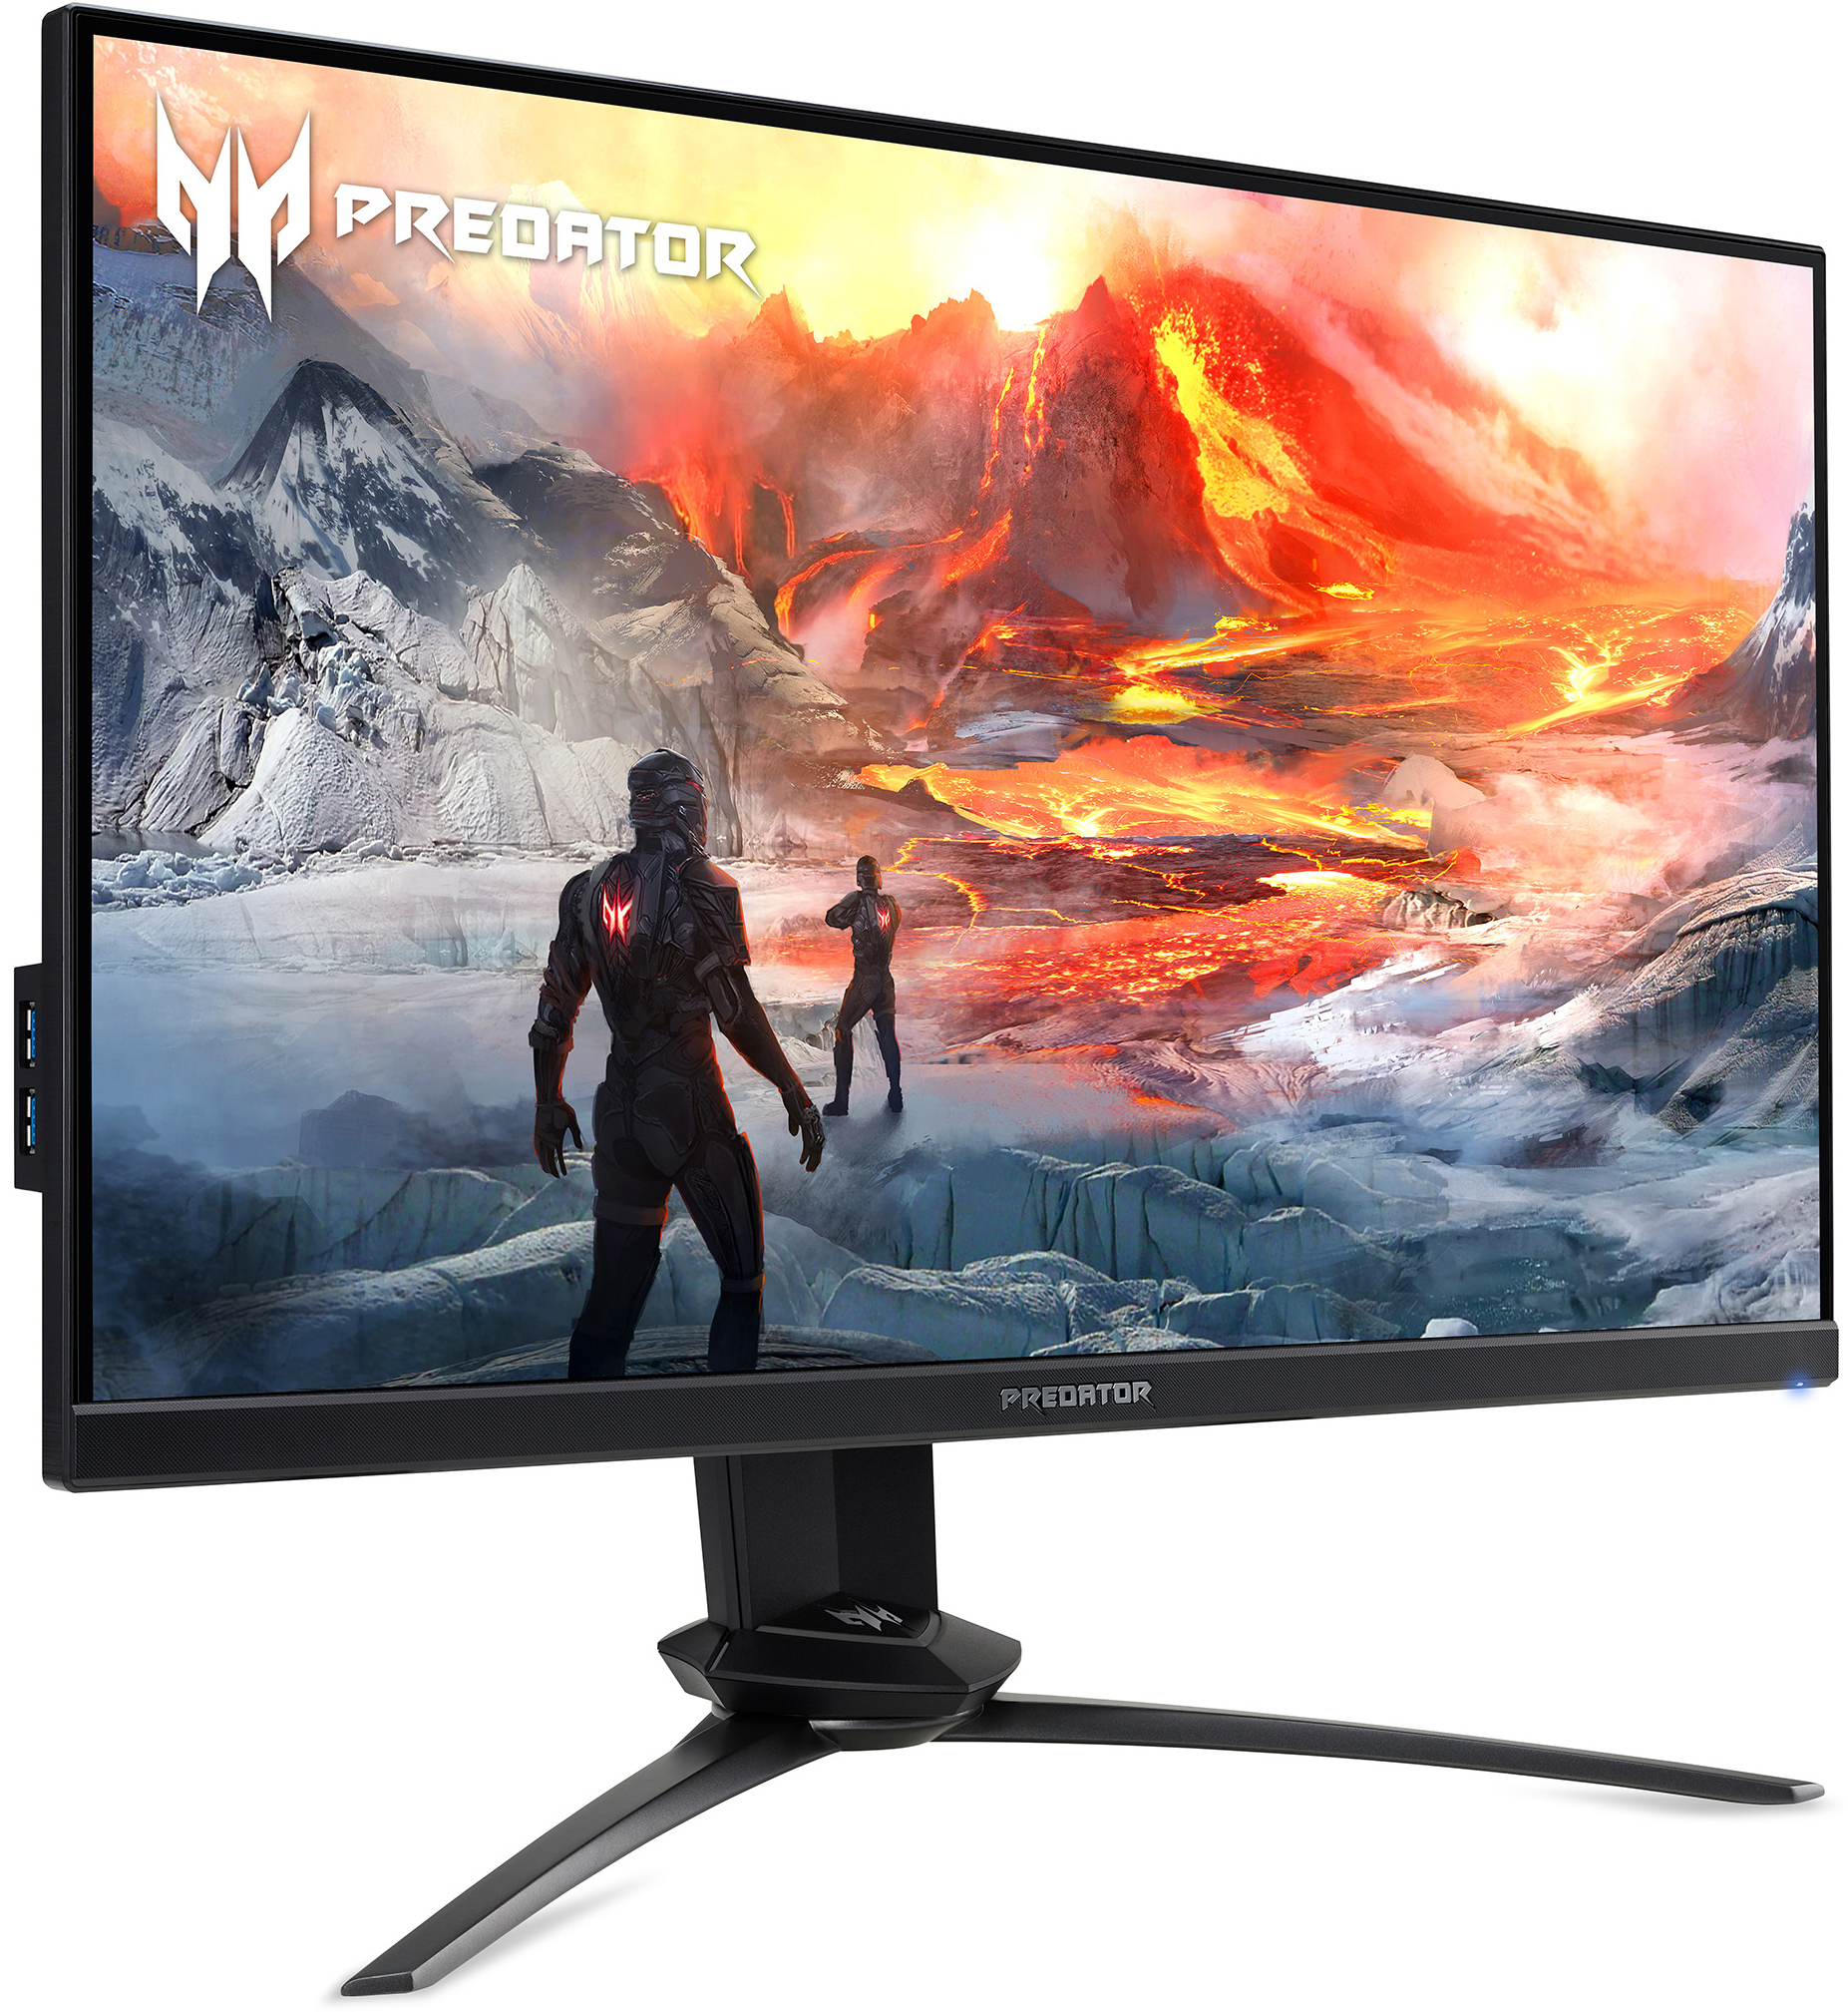 Acer Launches Predator XN253QX Monitor with 240 Hz & 0.4 ms G2G